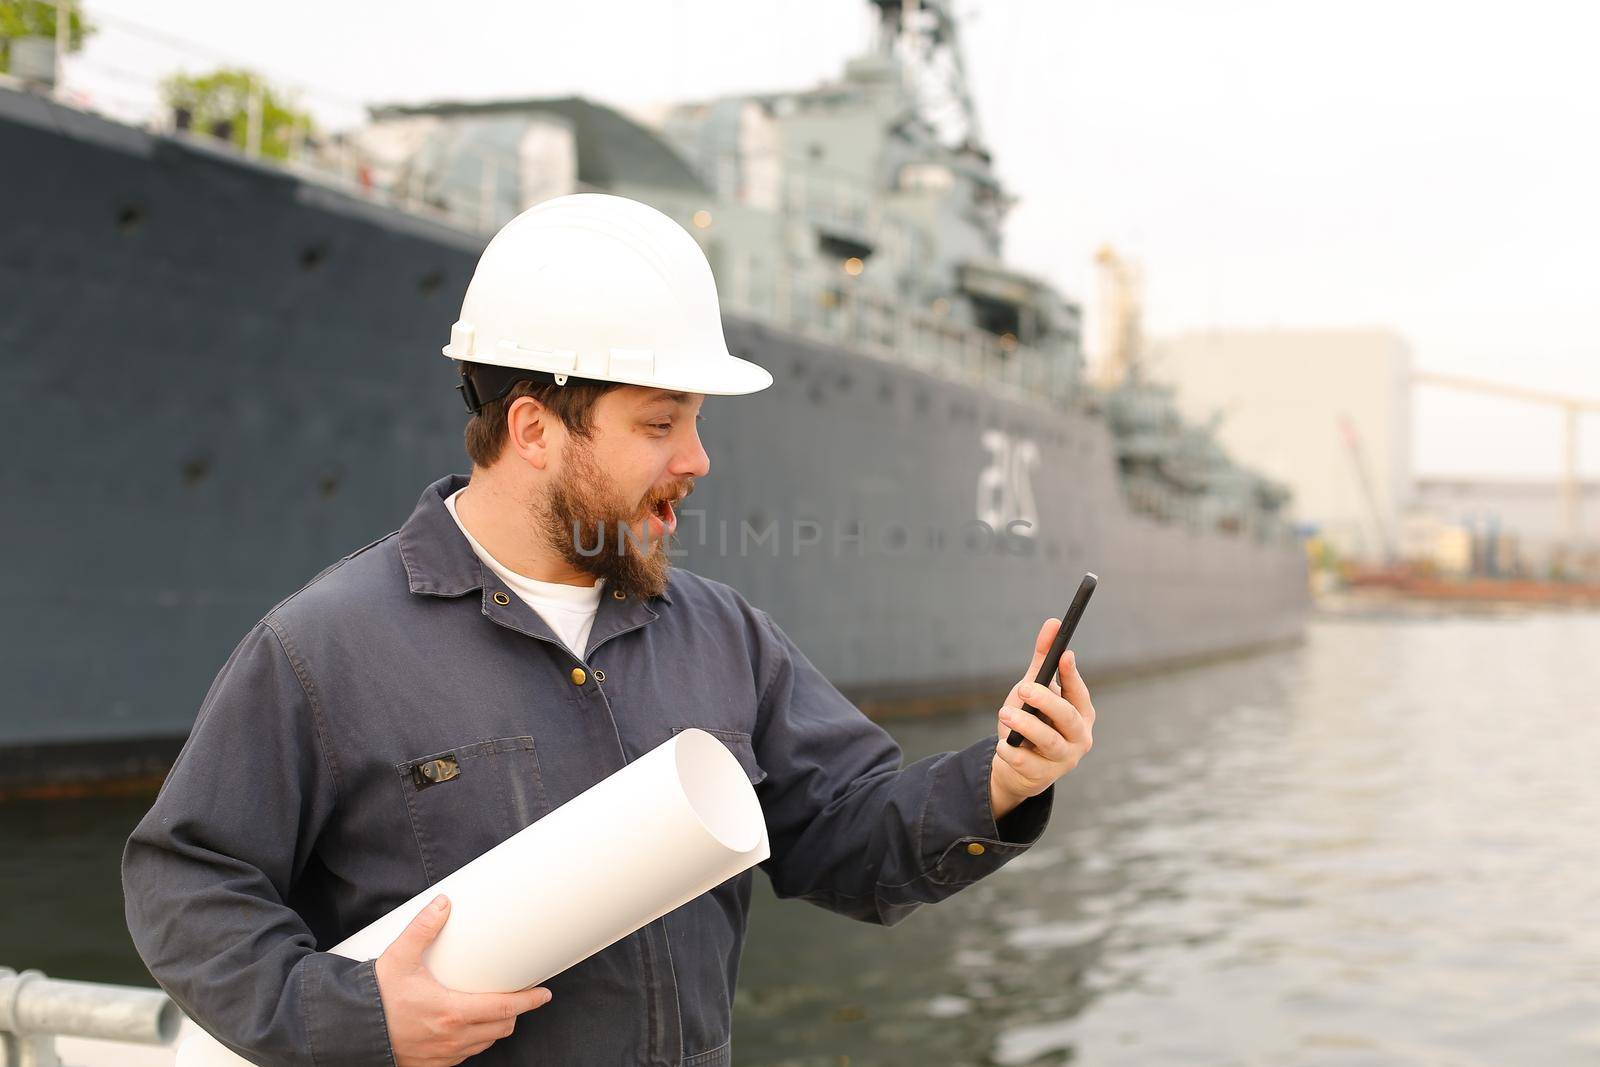 Marine engineer holding VHF walkie talkie and blueprints near vessel in background, wearing helmet and work jumpsuit. Concept of maritime profession , job and seaman.